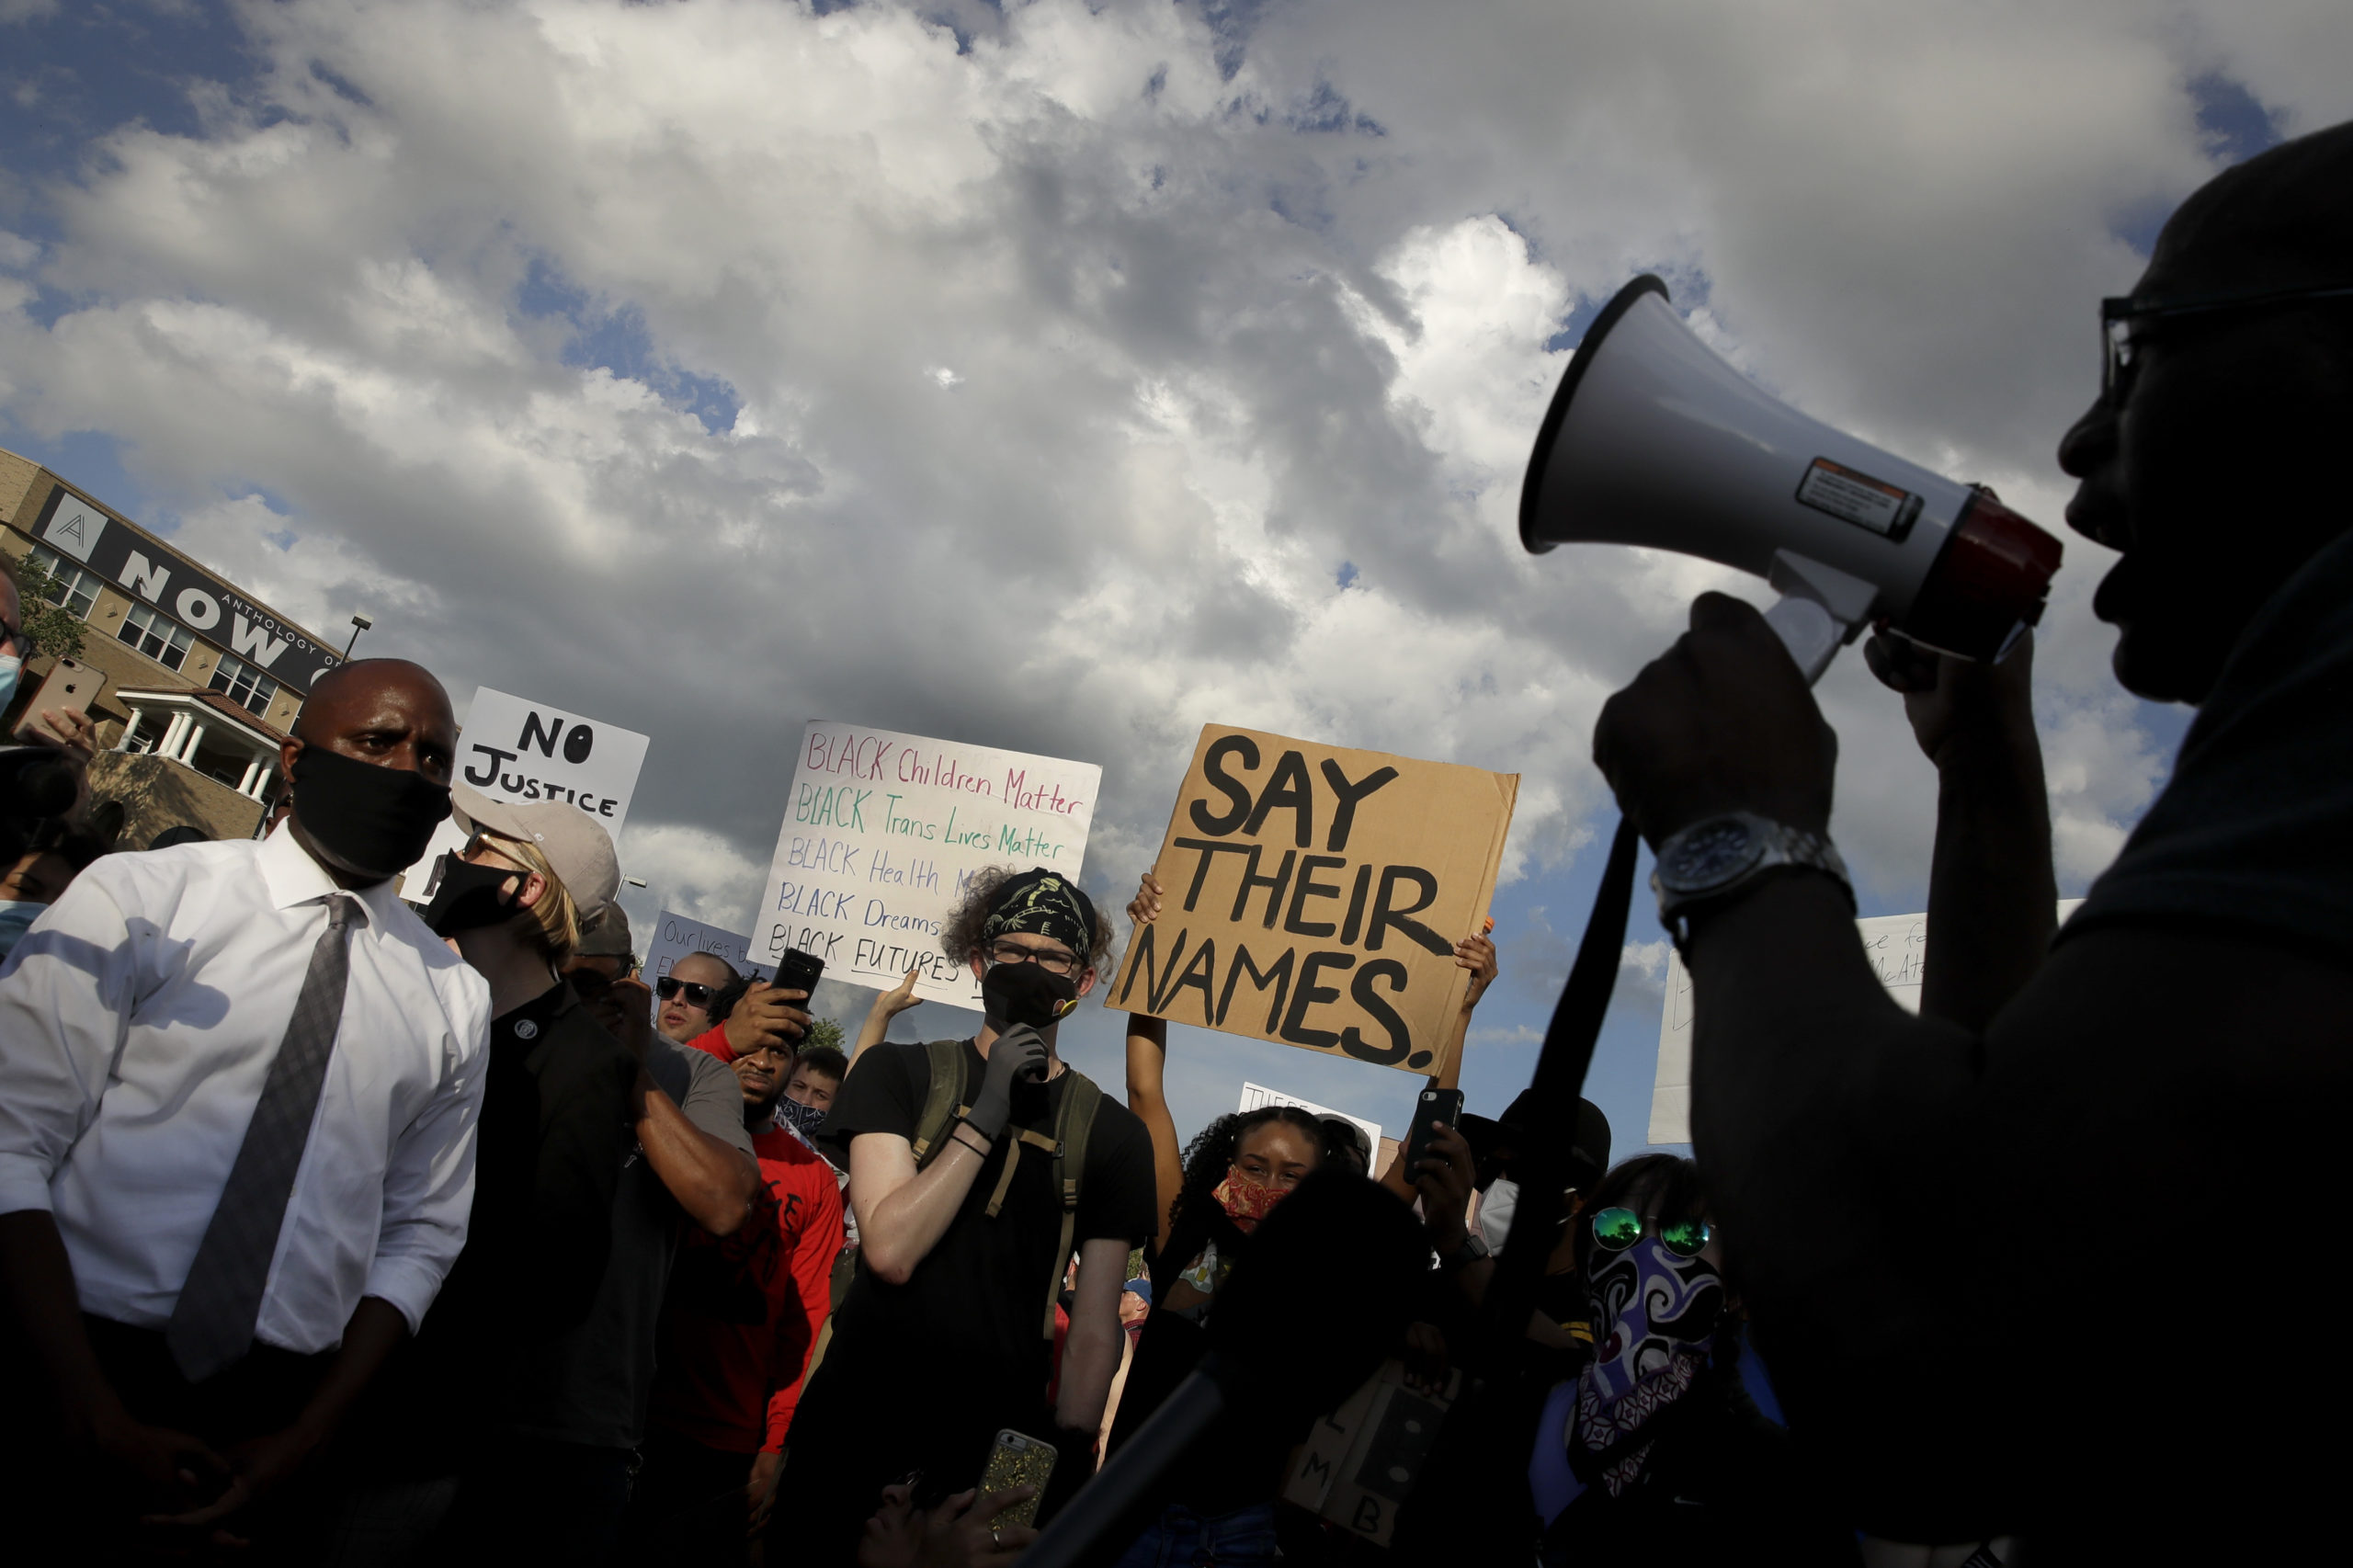 A crowd of people hold up signs One reads "Say Their Names," another reads "Black Children Matter. Black Trans Lives Matter. Black Health Matters. Black Dreams Matter. Black Futures Matter." A third sign, partially blocked by the crowd, reads "No Justice." To the right of the frame, Mayor Lucas yells into a megaphone.